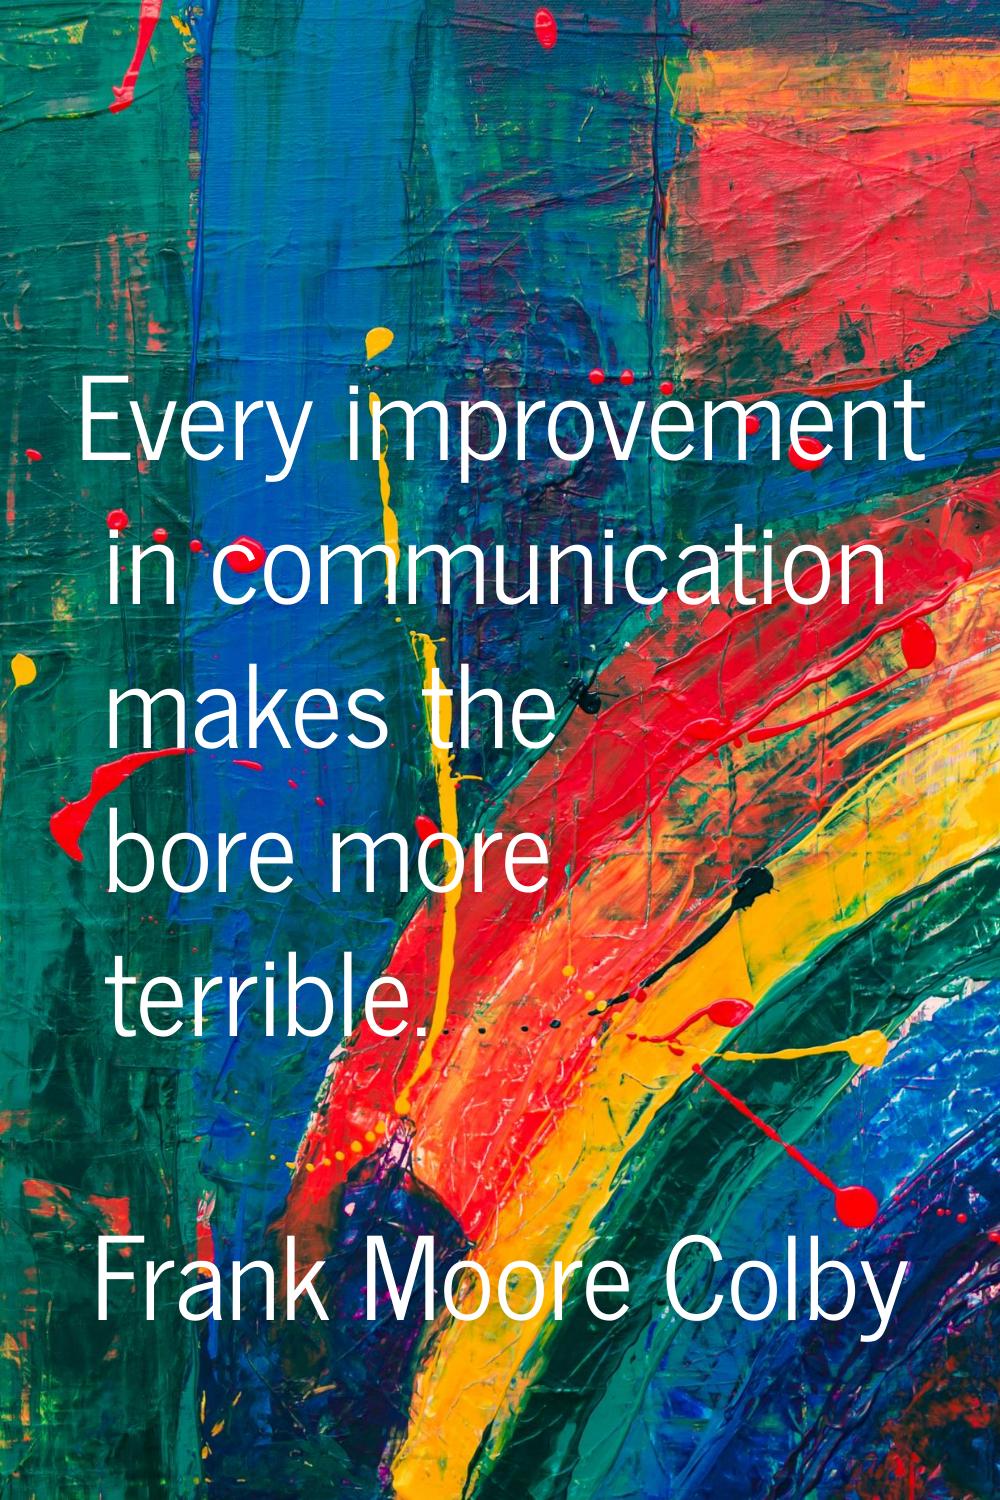 Every improvement in communication makes the bore more terrible.